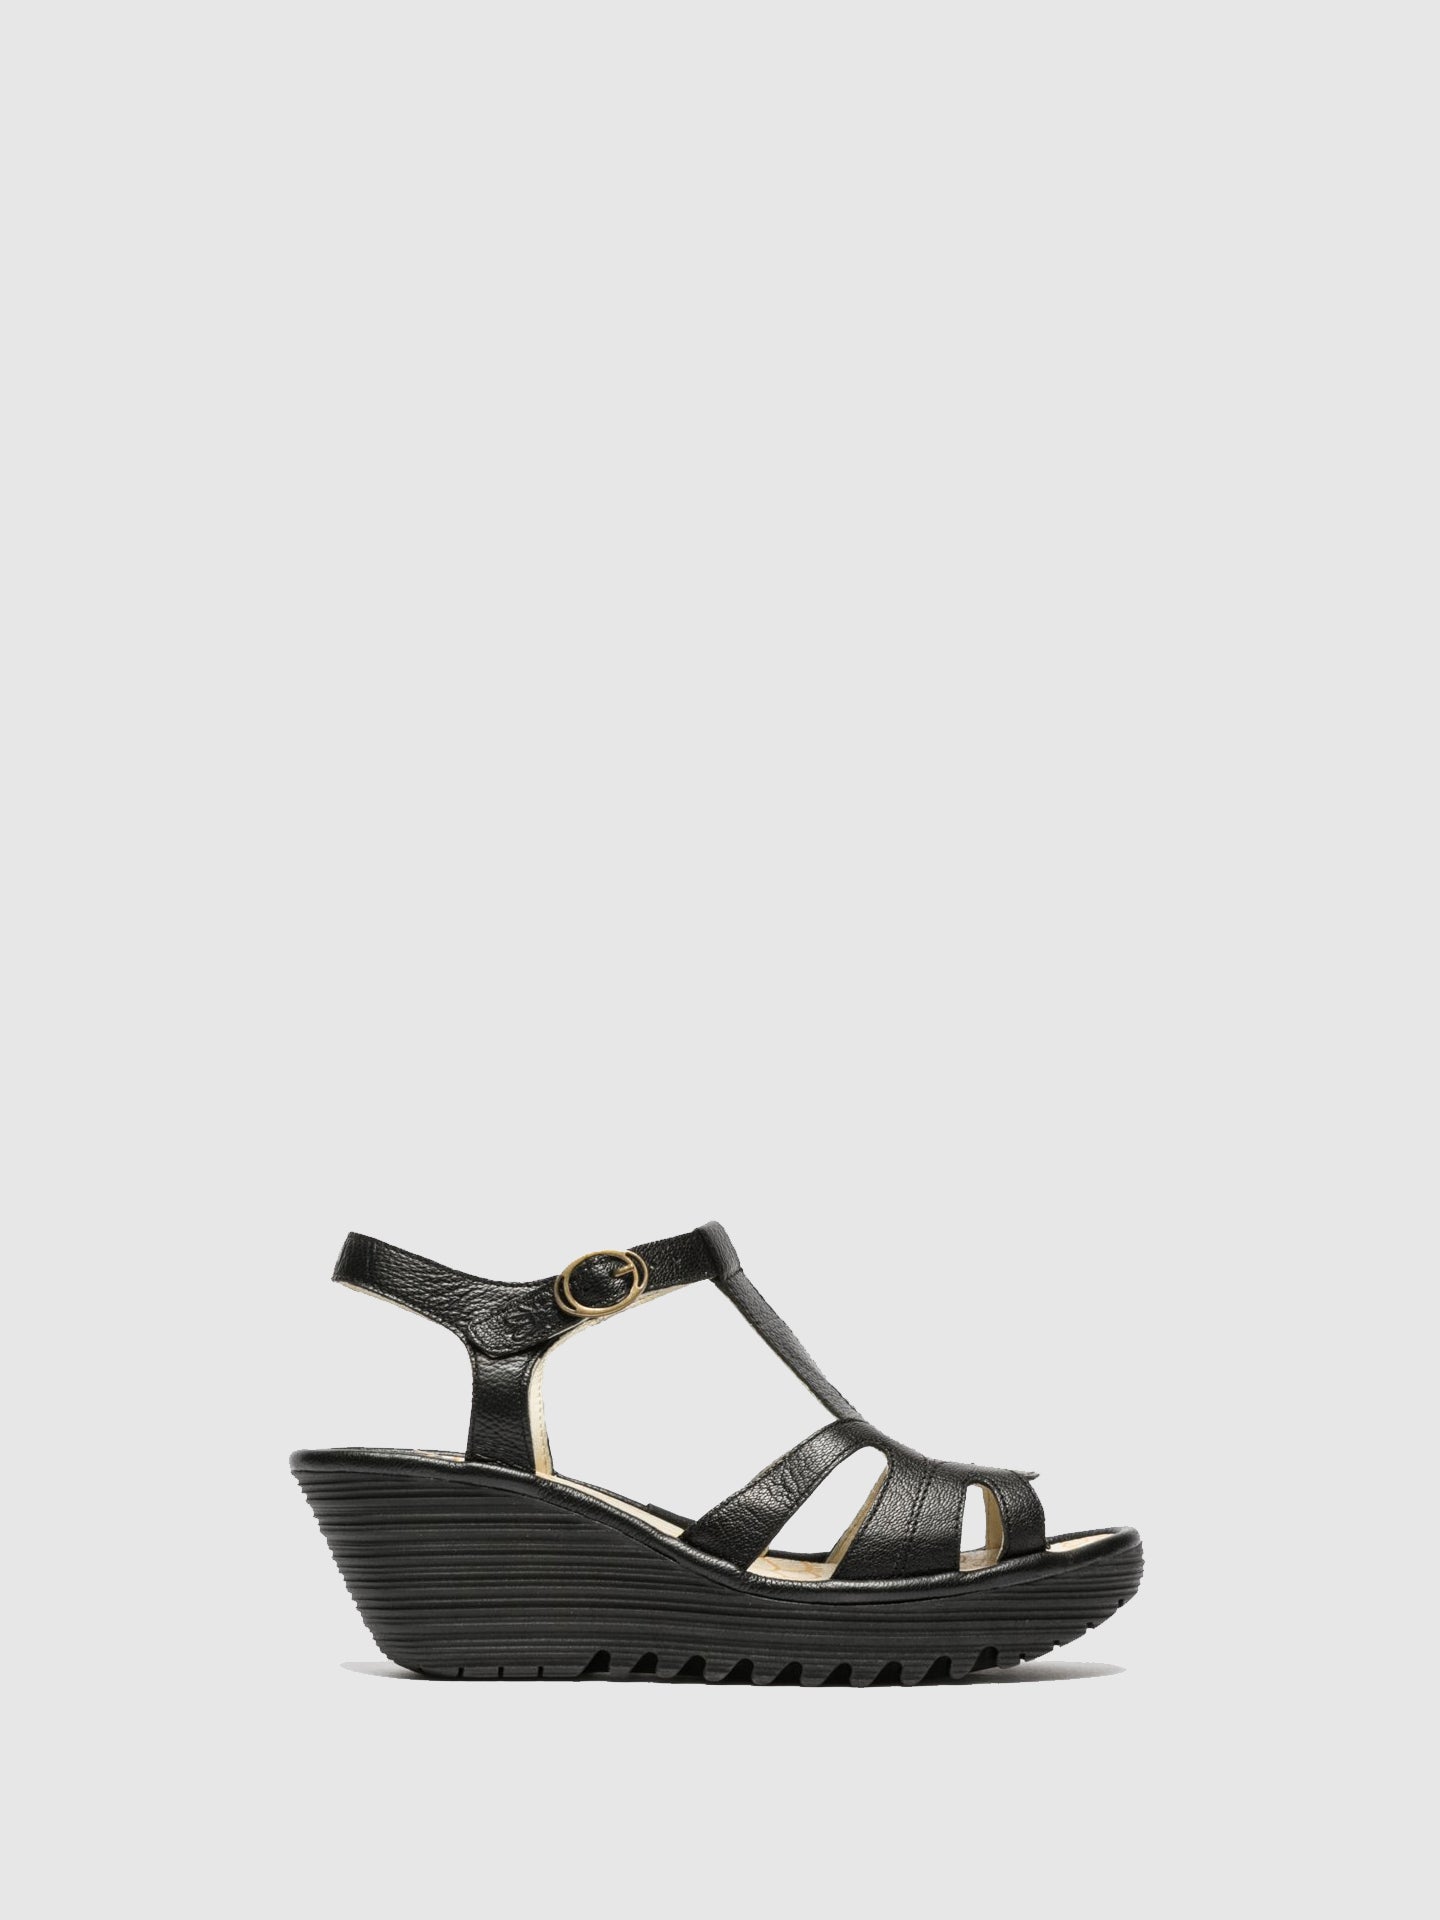 Fly London Black Wedge Sandals